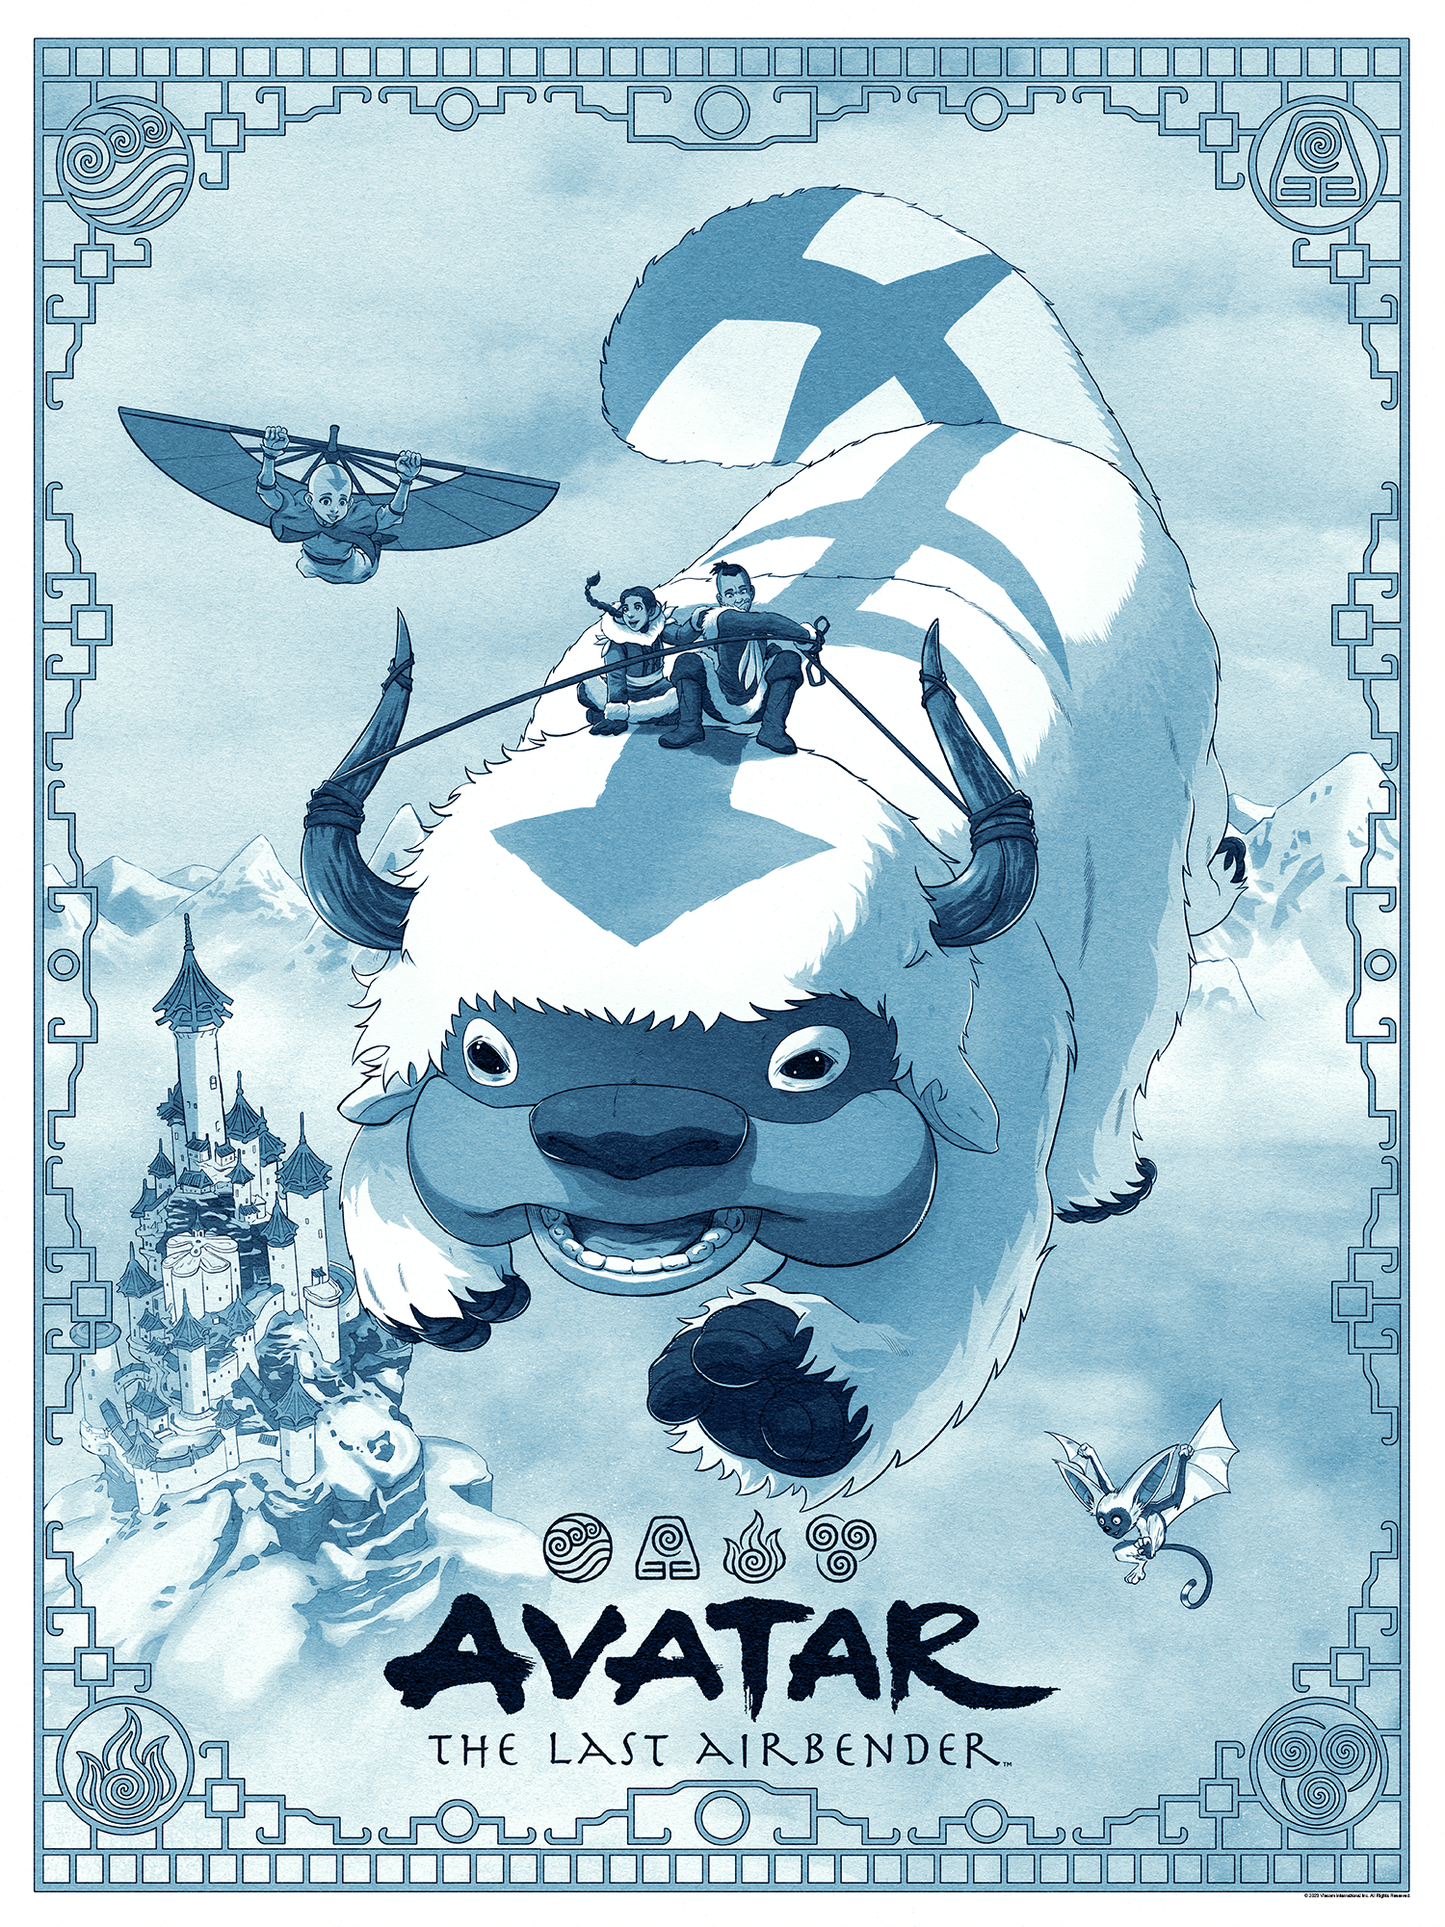 Mike McGee "Avatar: The Last Airbender" Variant